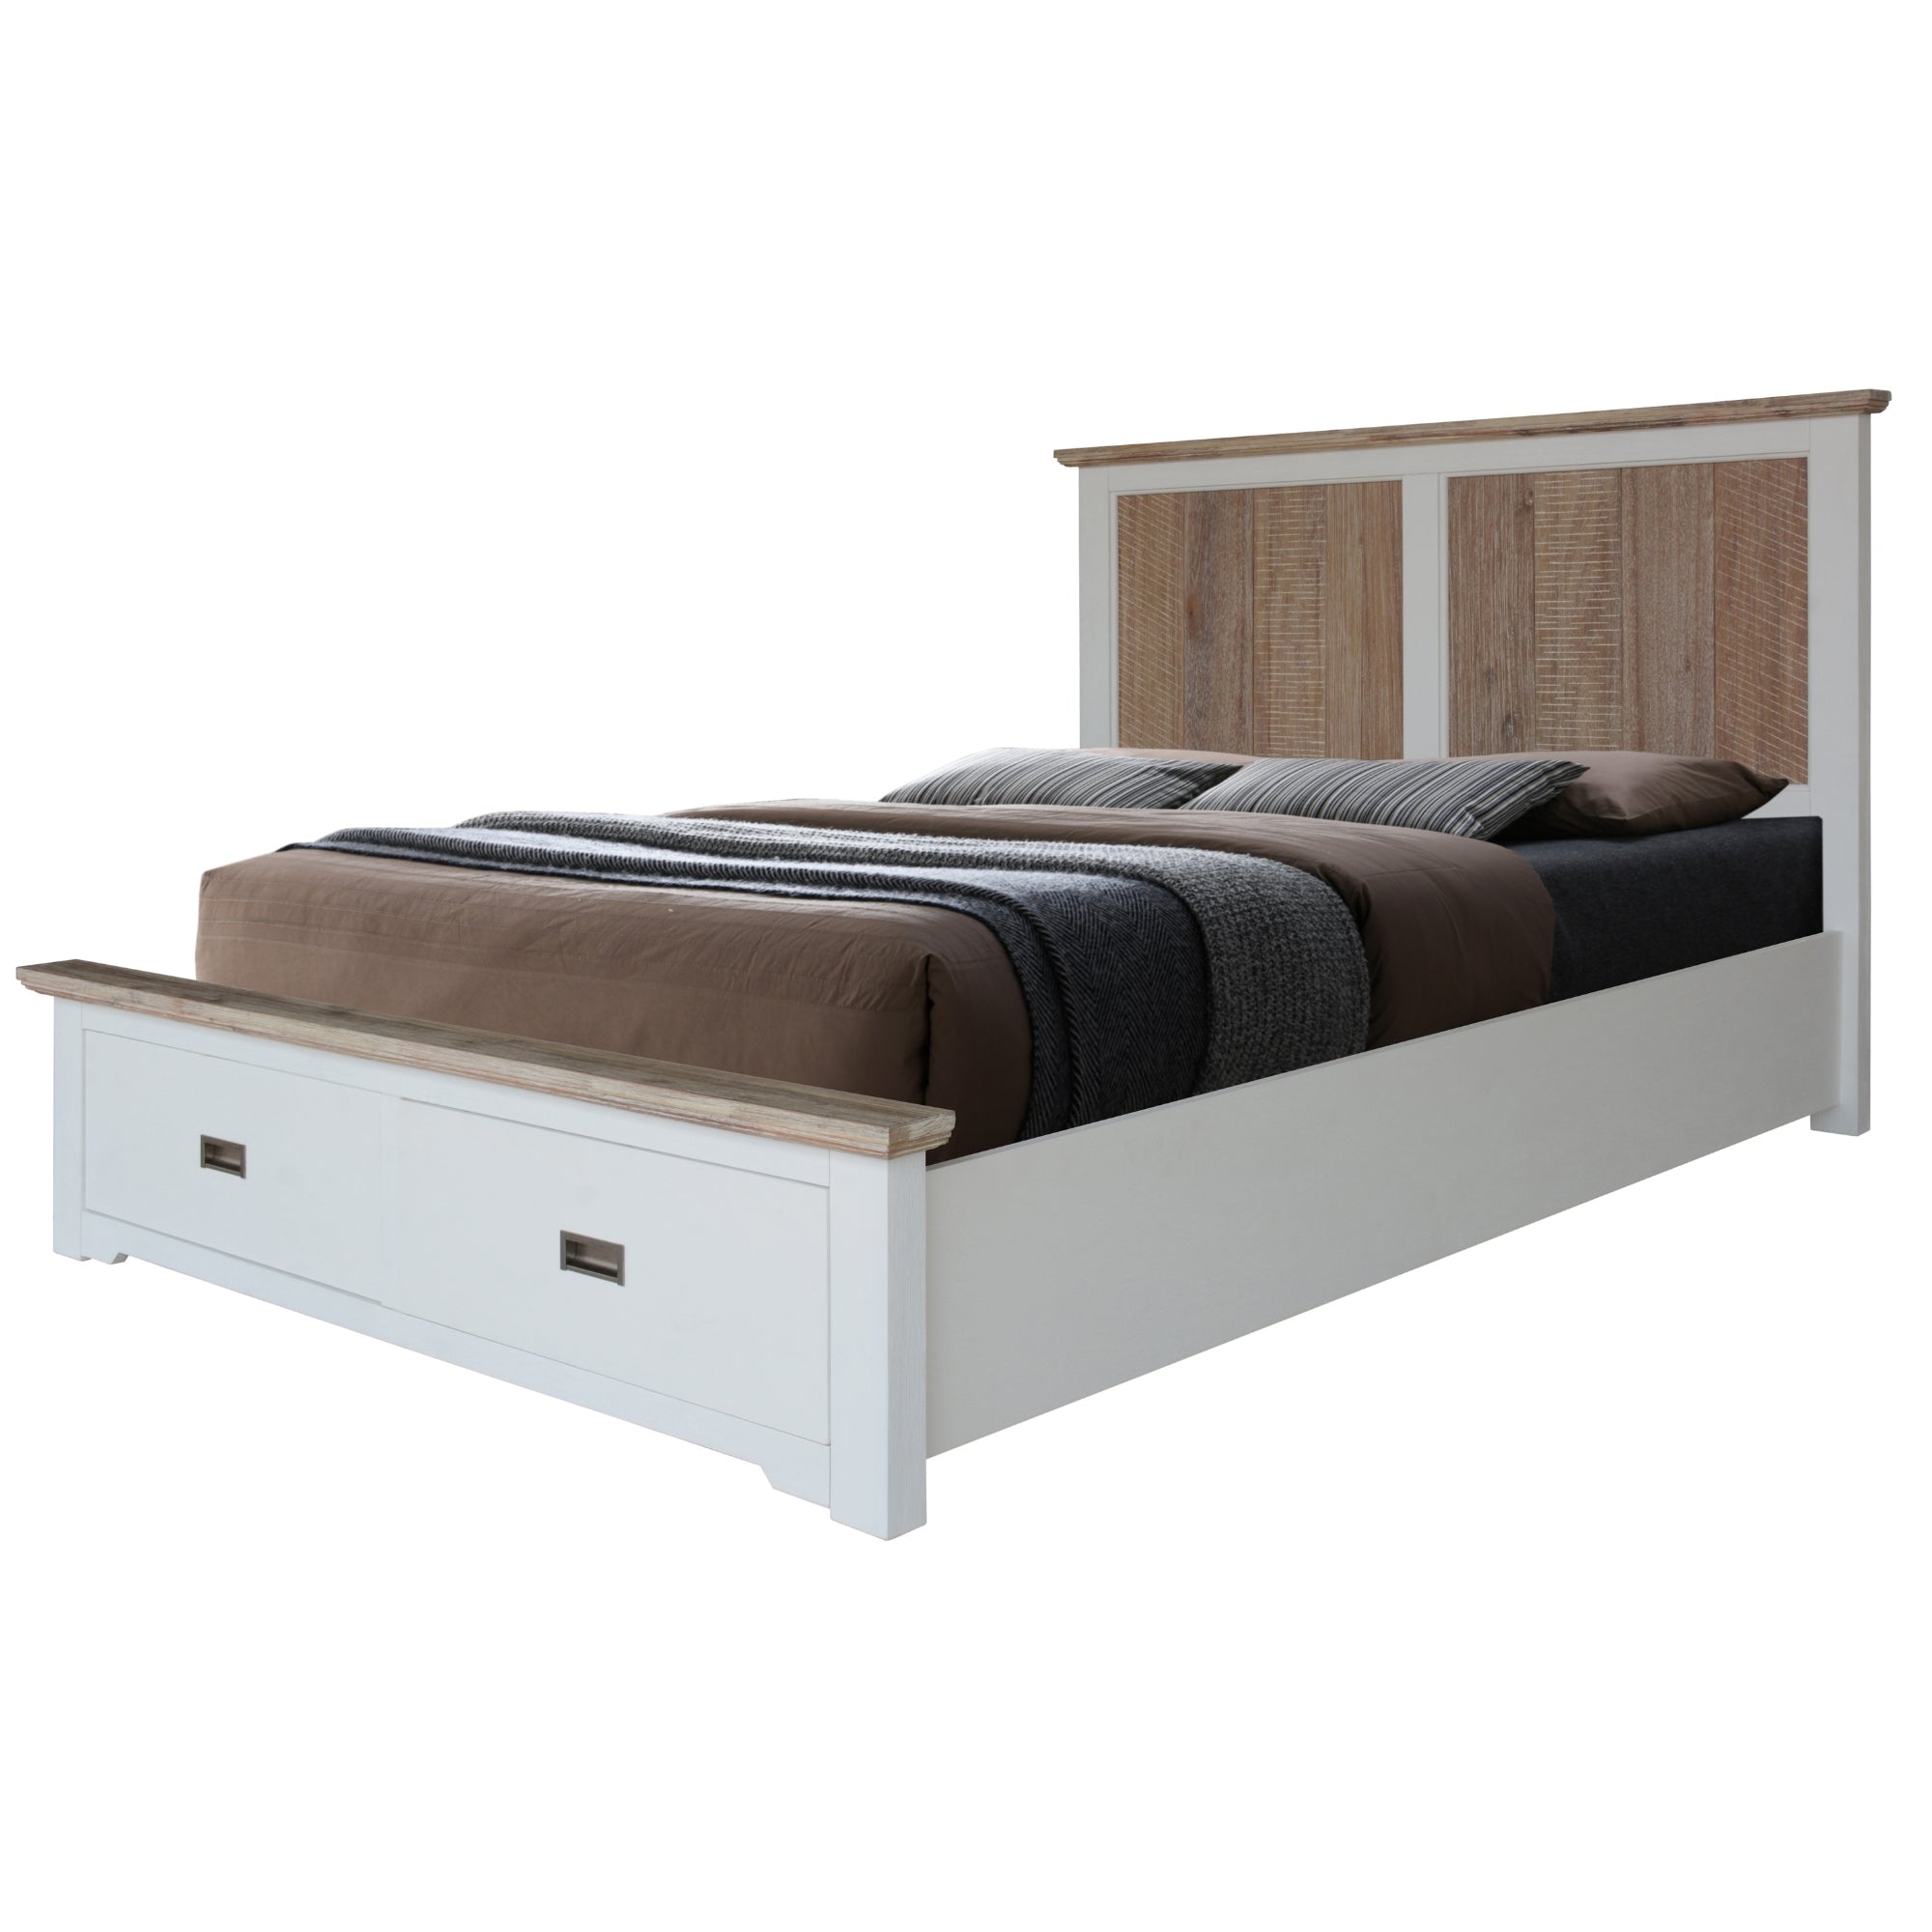 Queen Bed Frame w/ Storage Drawers, Acacia Timber, Hampton Style